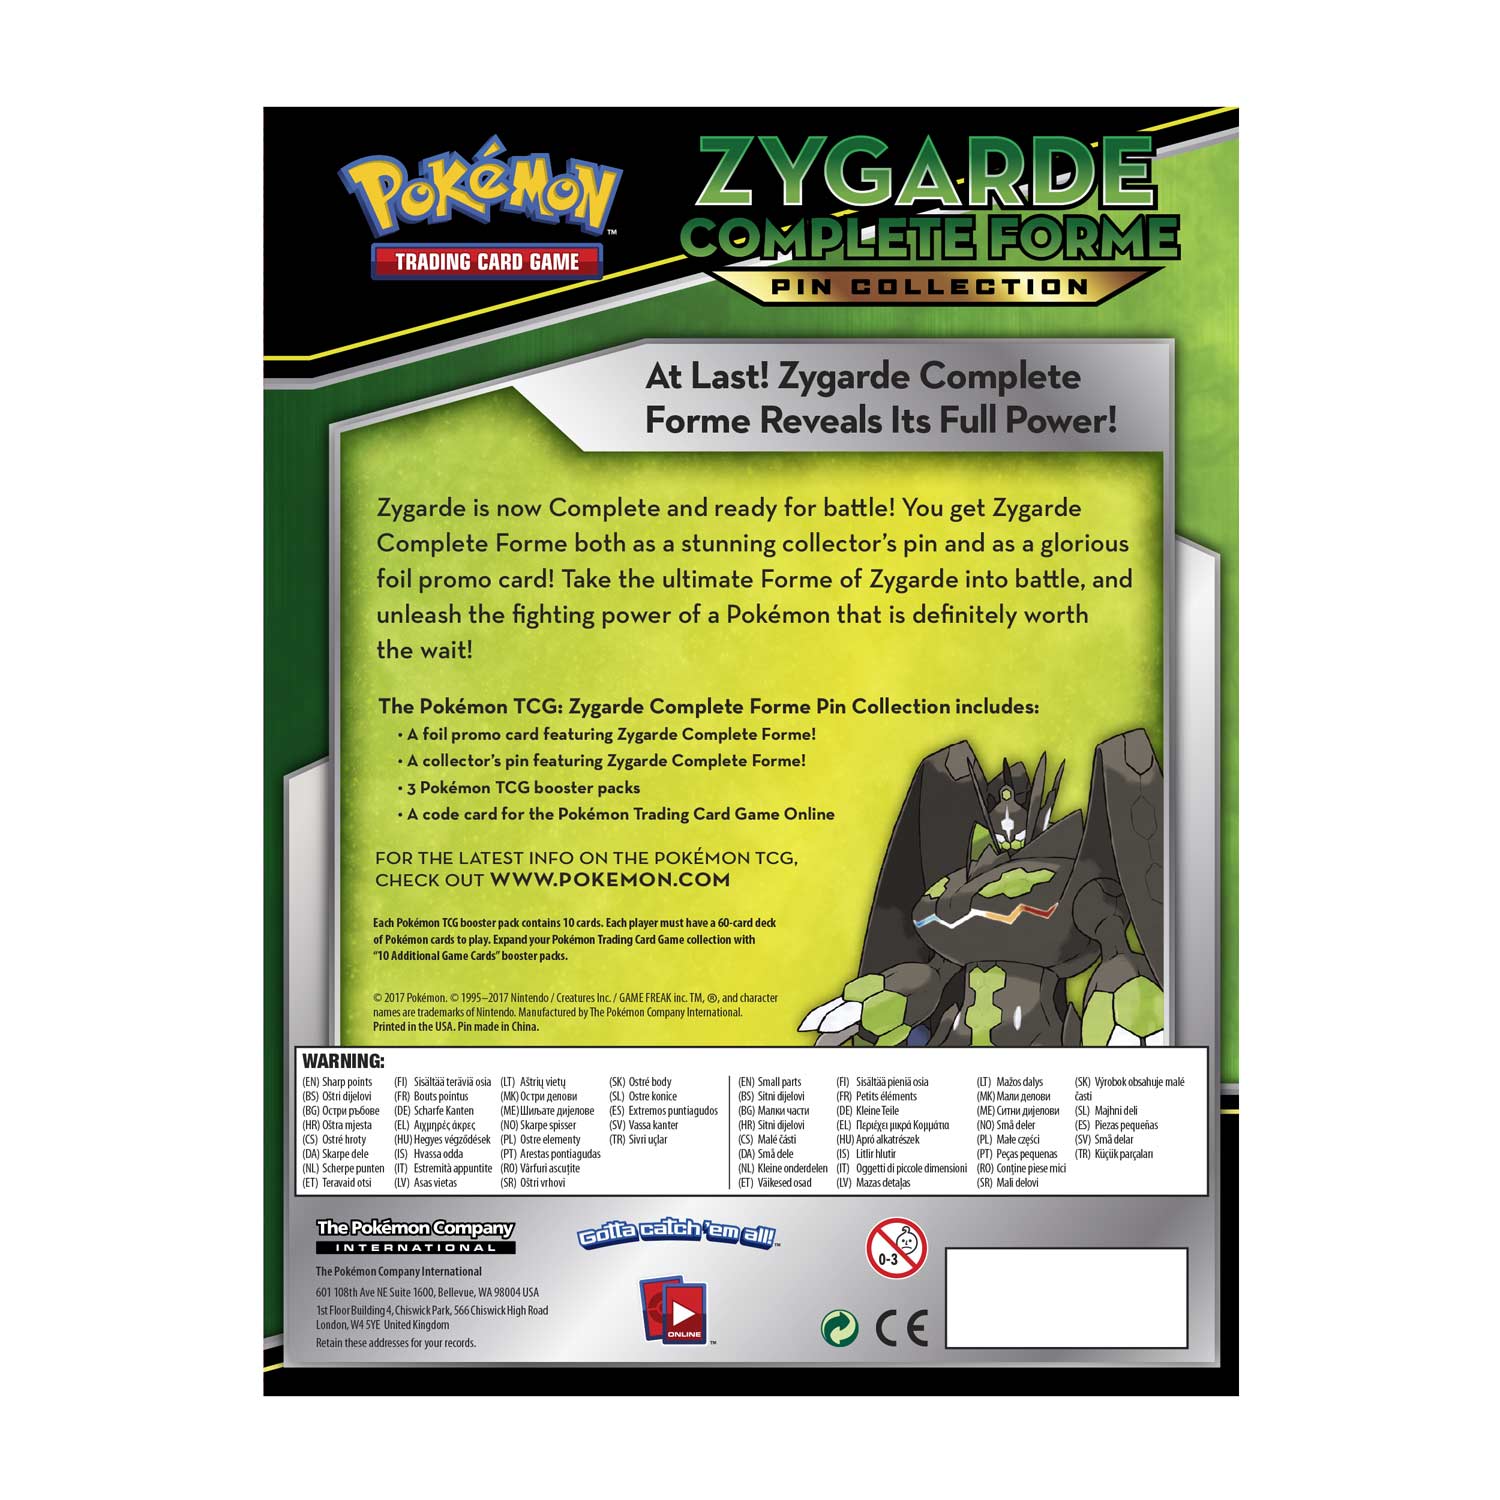 POKEMON Zygarde Complete Forme Pin Collection new trading cards PIN INCLUDED!!! 